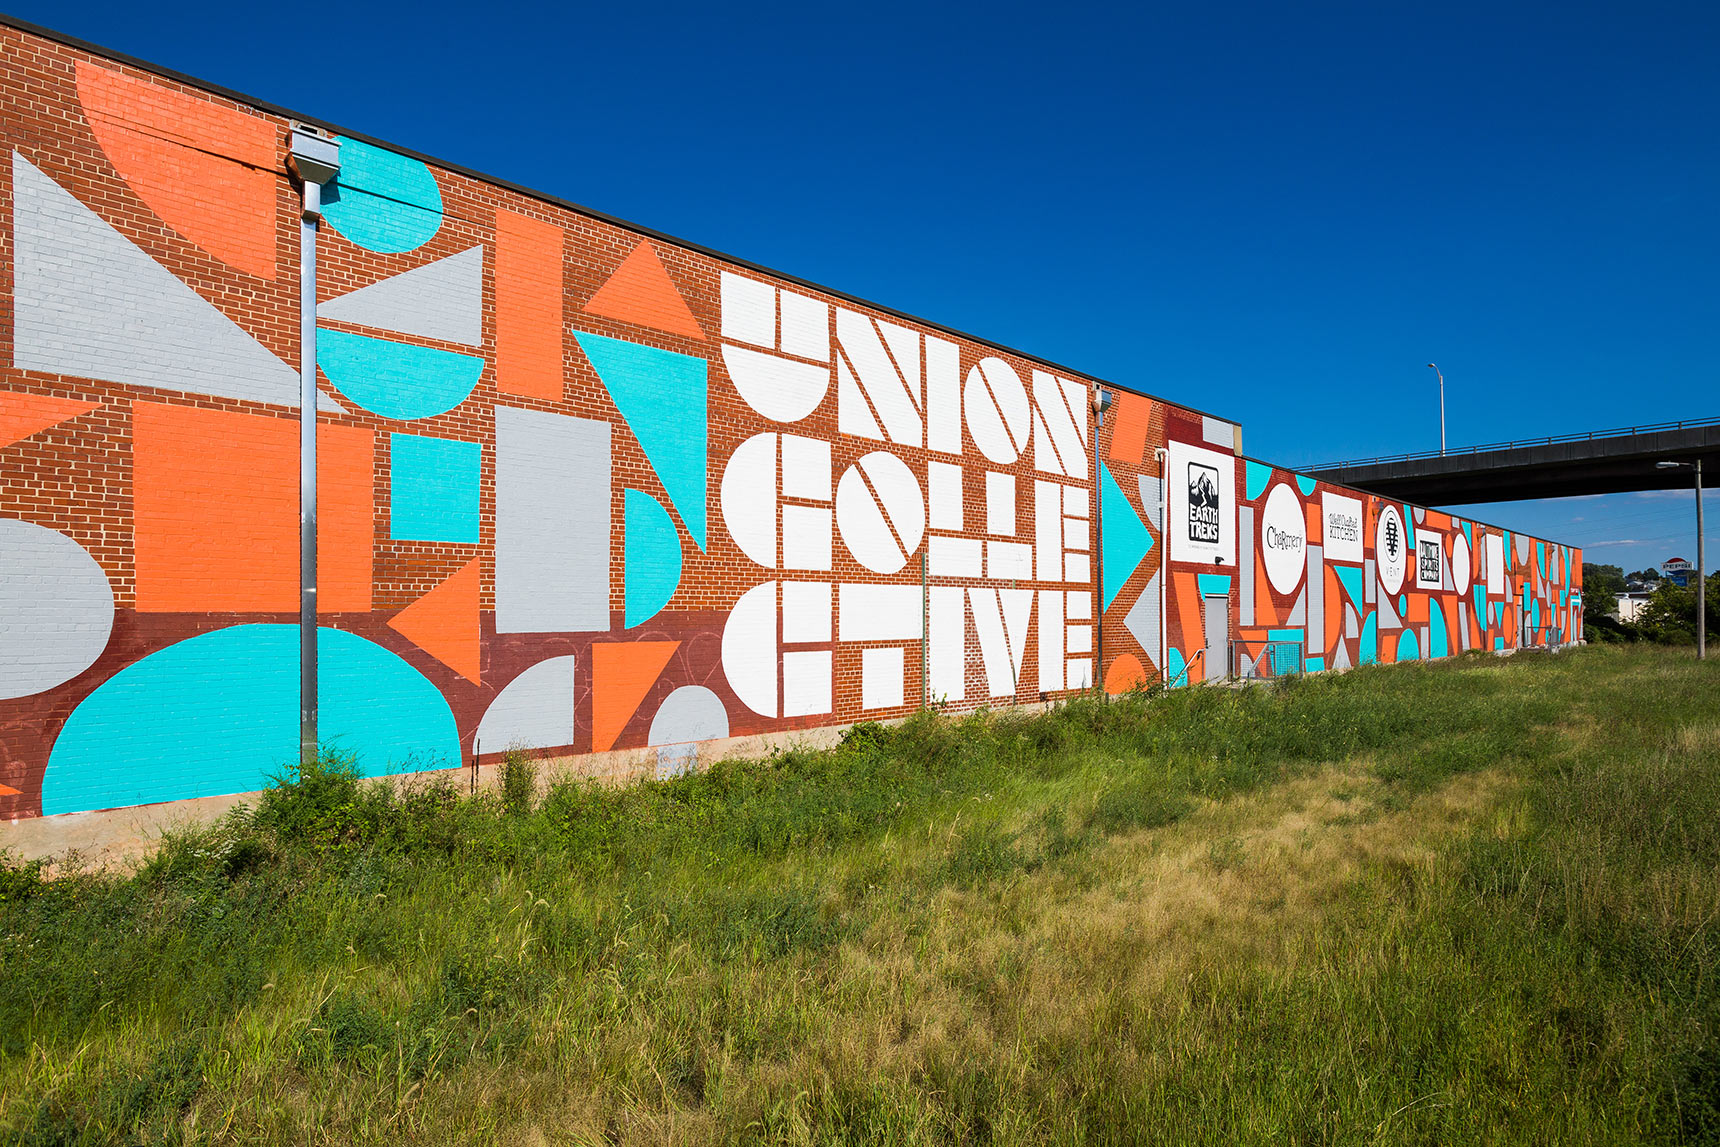 Enormous mural on the side of the Union Collective warehouse building in baltimore composed of colorful orange, blue, and grey geometric shapes including circles, triangles, parallelograms, squares, etc.